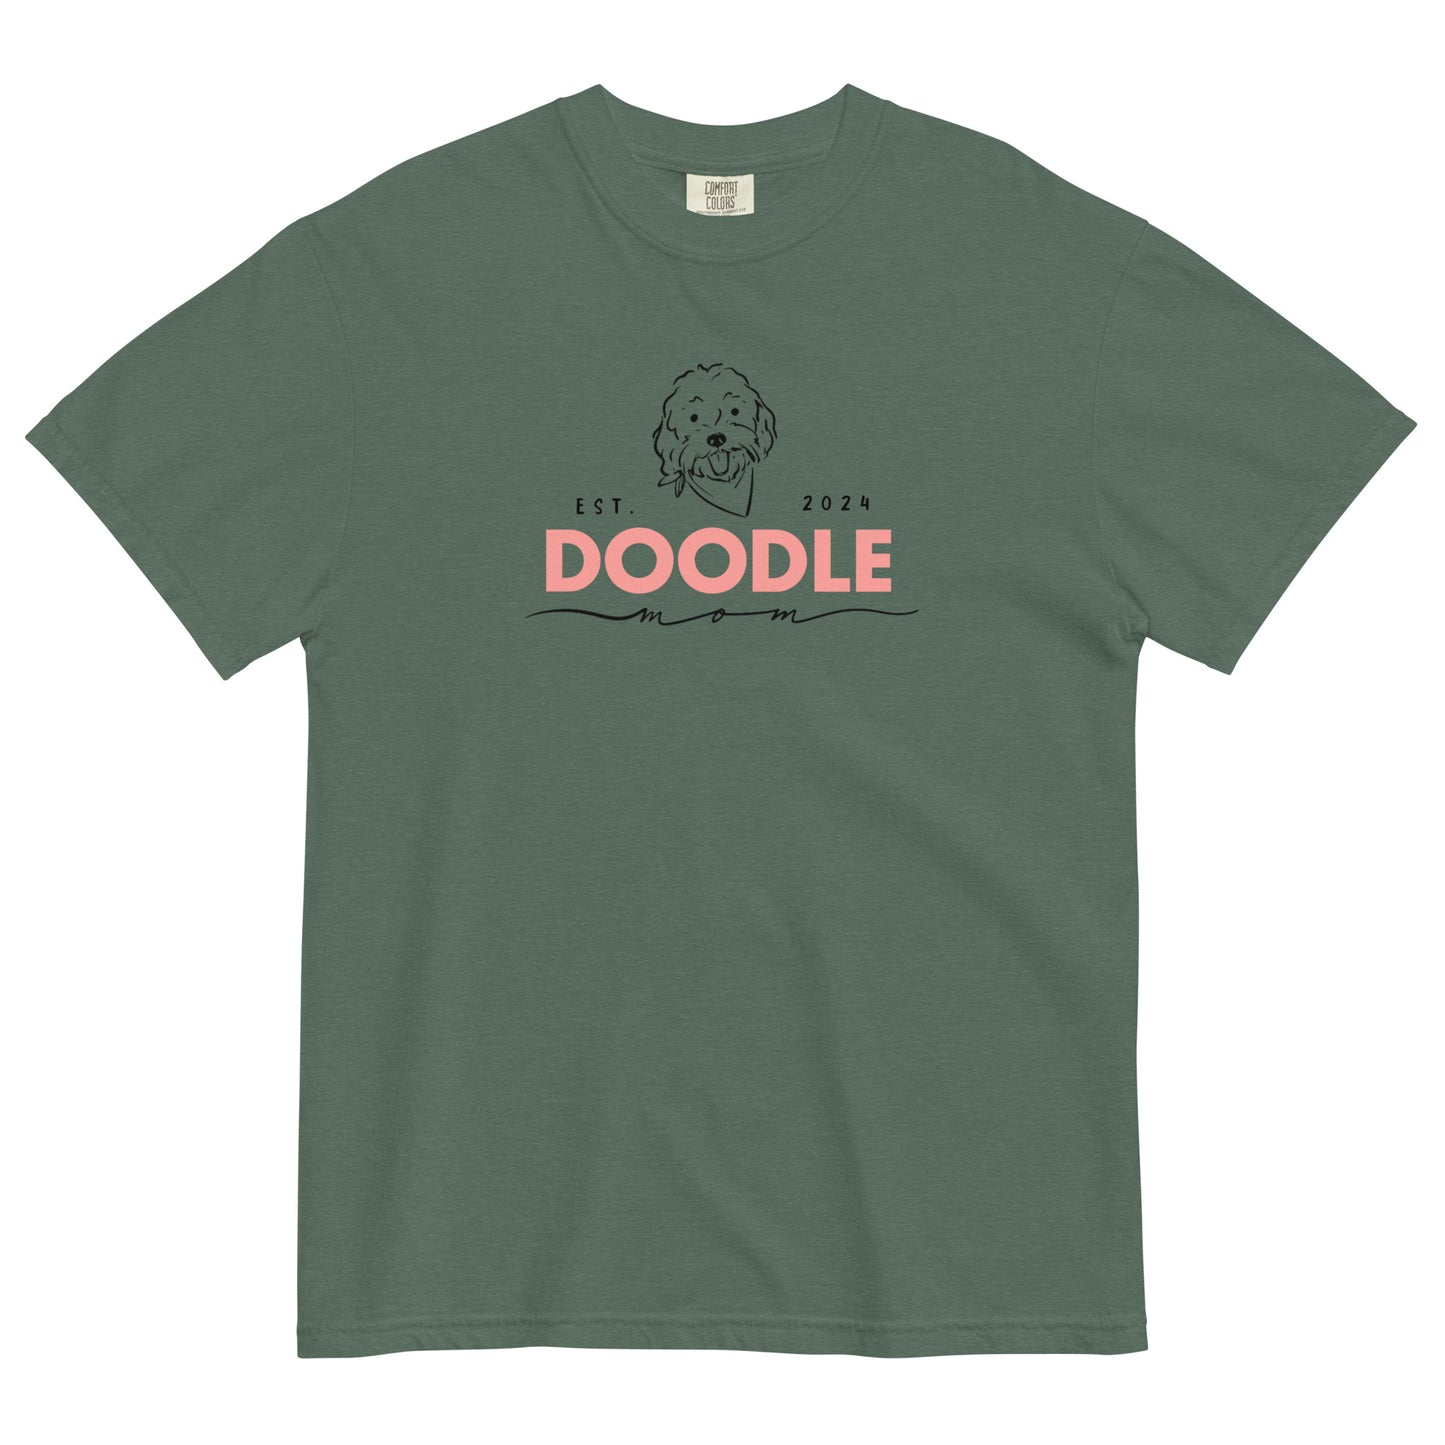 This Goldendoodle shirt features the message, "Doodle Mom Est. 2024" with a cute Doodle dog's face printed on the front of a cozy T-Shirt. The tag inside the shirt says Comfort Colors